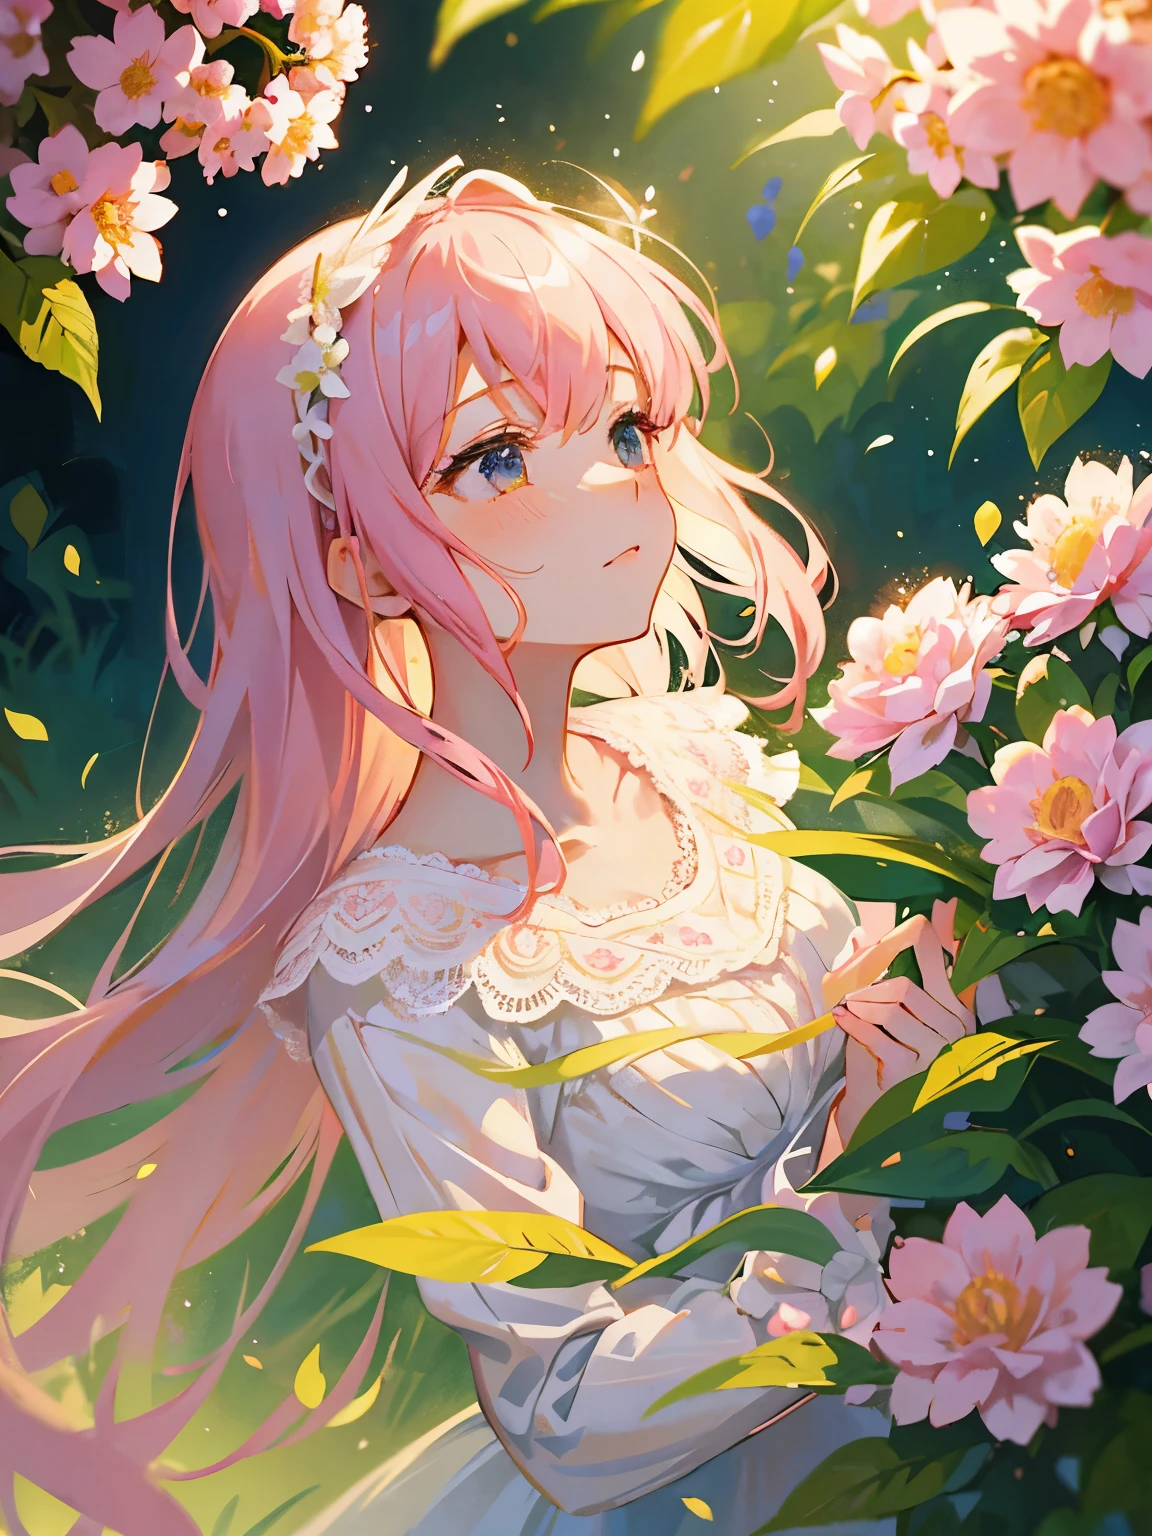 pink haired girl,wearing a white lace lolita dress,holding a flower,lush green garden with blooming flowers,soft warm sunlight,serene and peaceful atmosphere,vibrant colors,anime style,portraits,delicate lace details,fantasy elements,sparkling dewdrops on the flowers,butterflies fluttering around,whimsical and dreamy ambiance